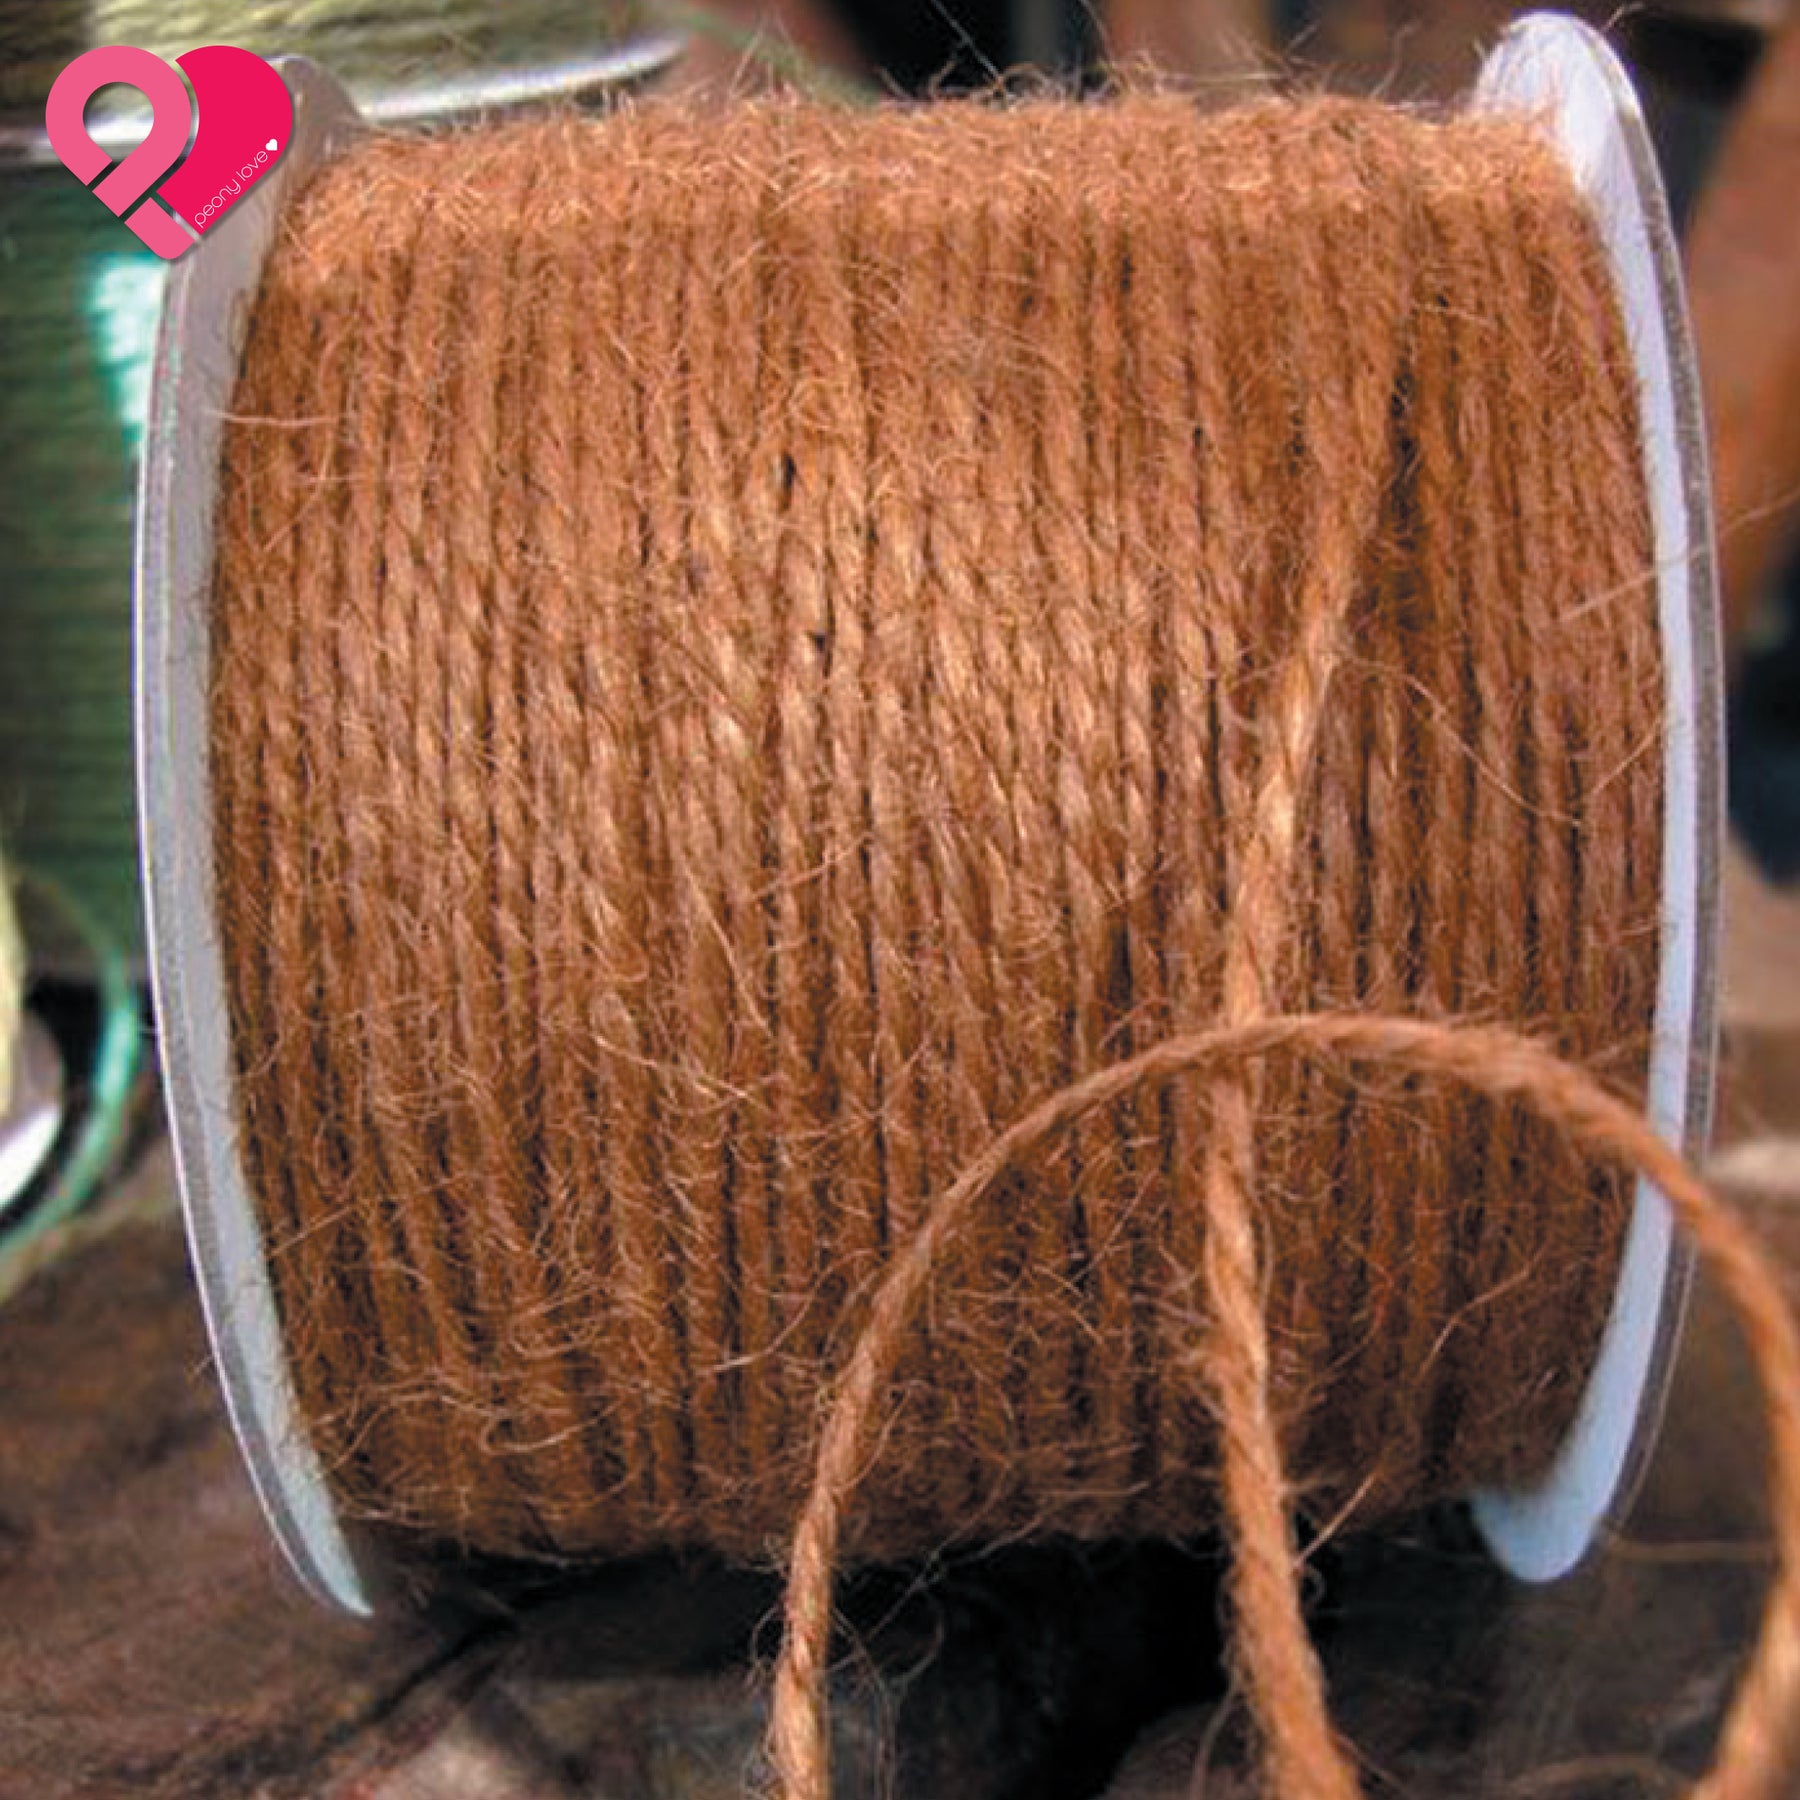 Natural thick jute twine - 5m - Two colors available